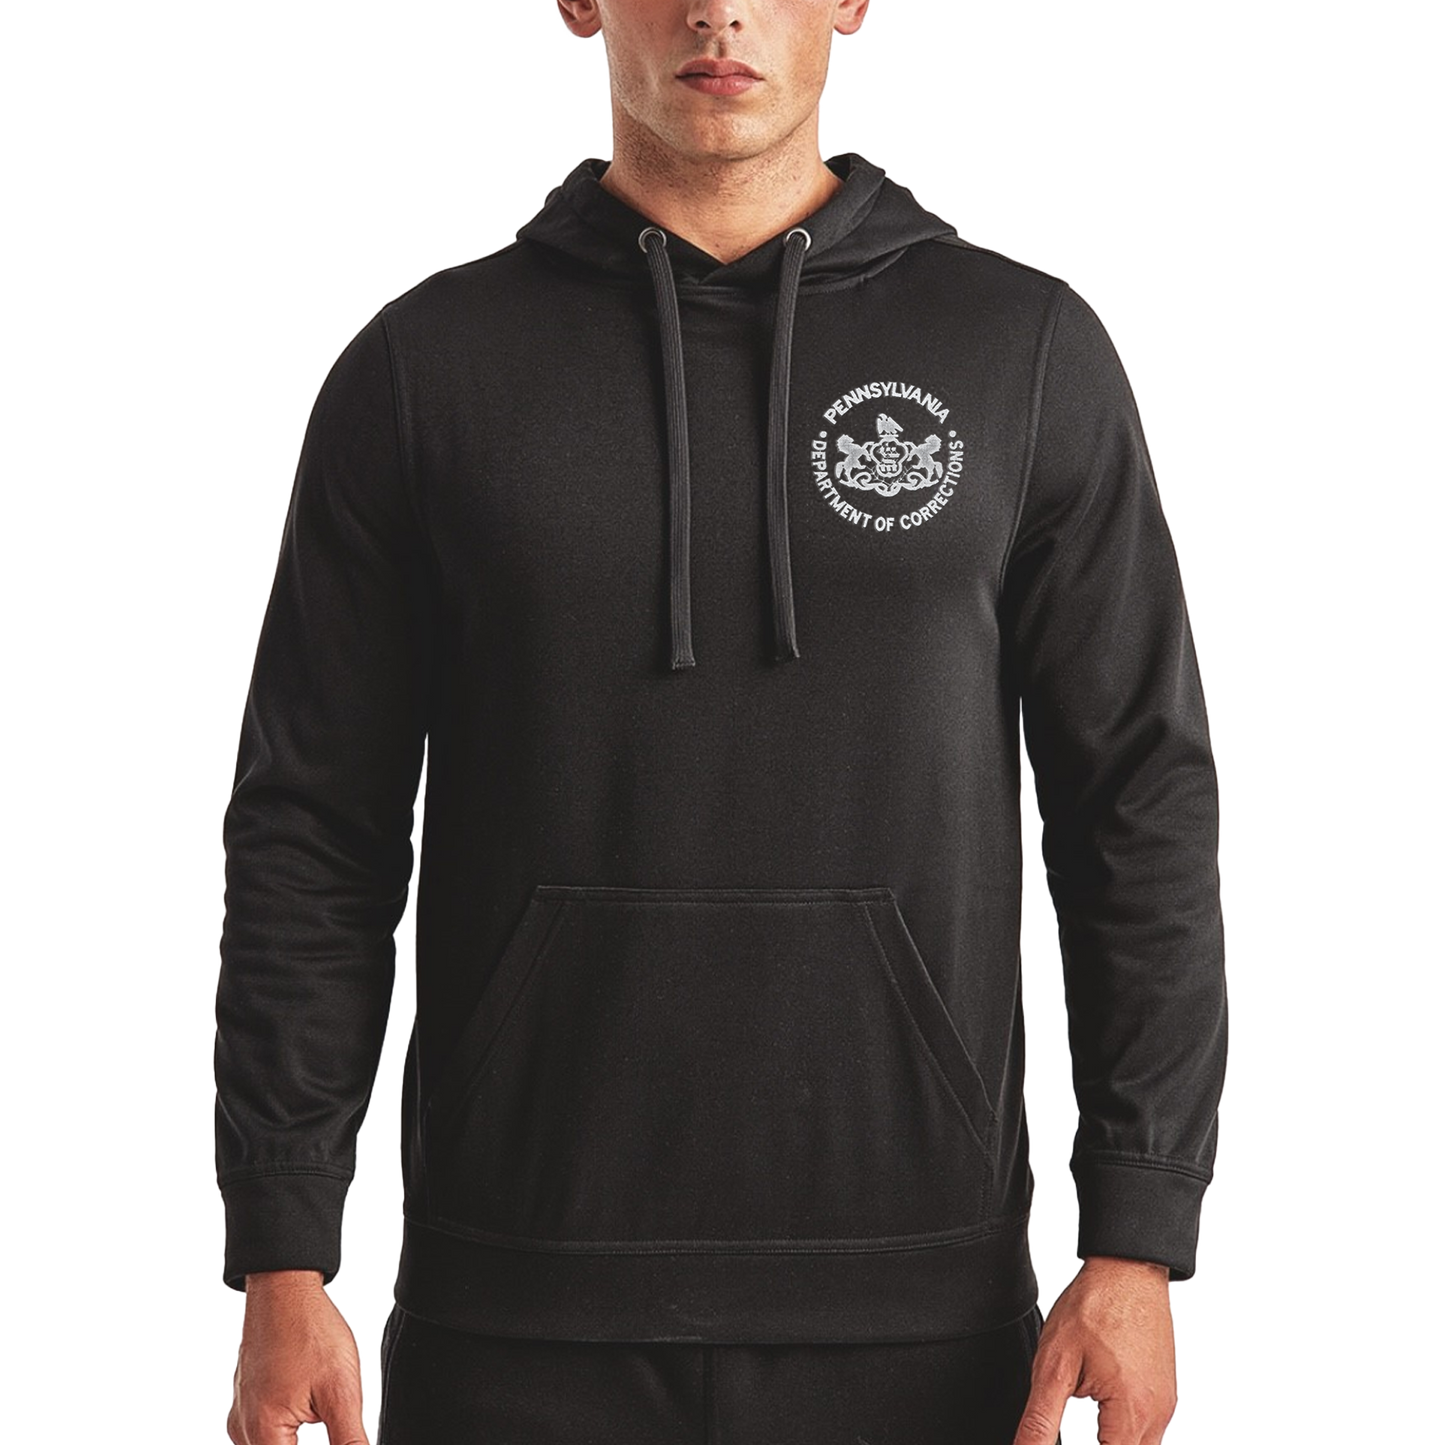 Performance Hooded Sweatshirt with Embroidered Department of Corrections Logos (Various Colors)